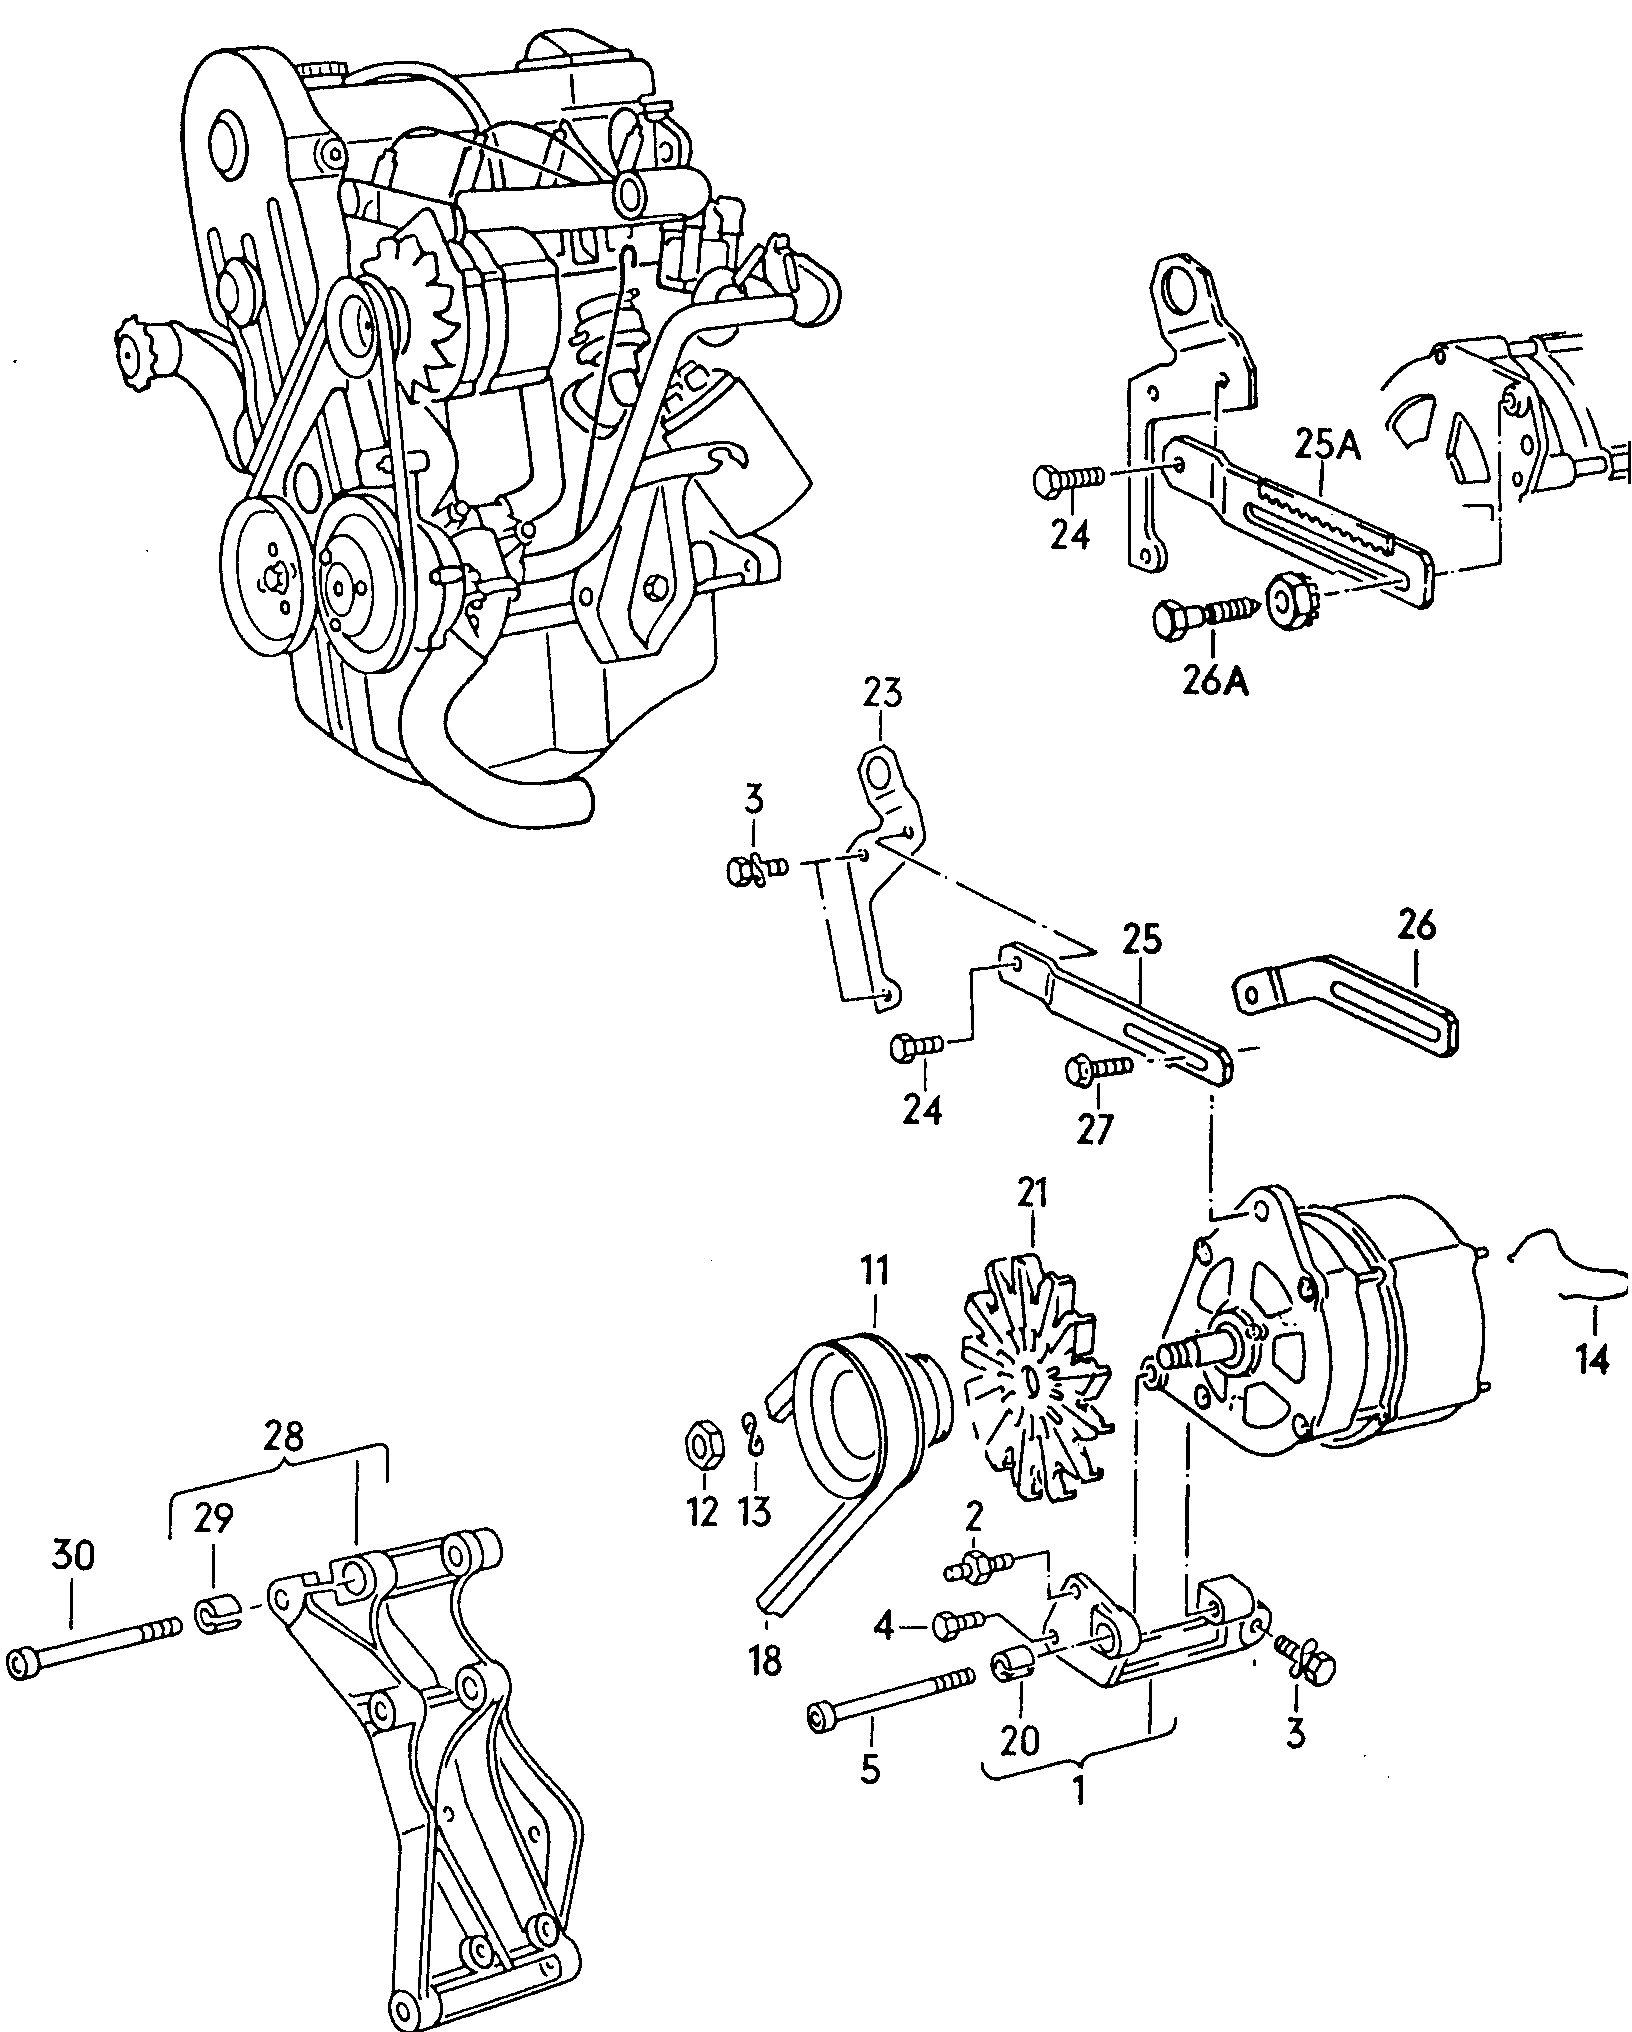 connecting and mounting parts
for alternator - Golf Cabriolet(GOC)  